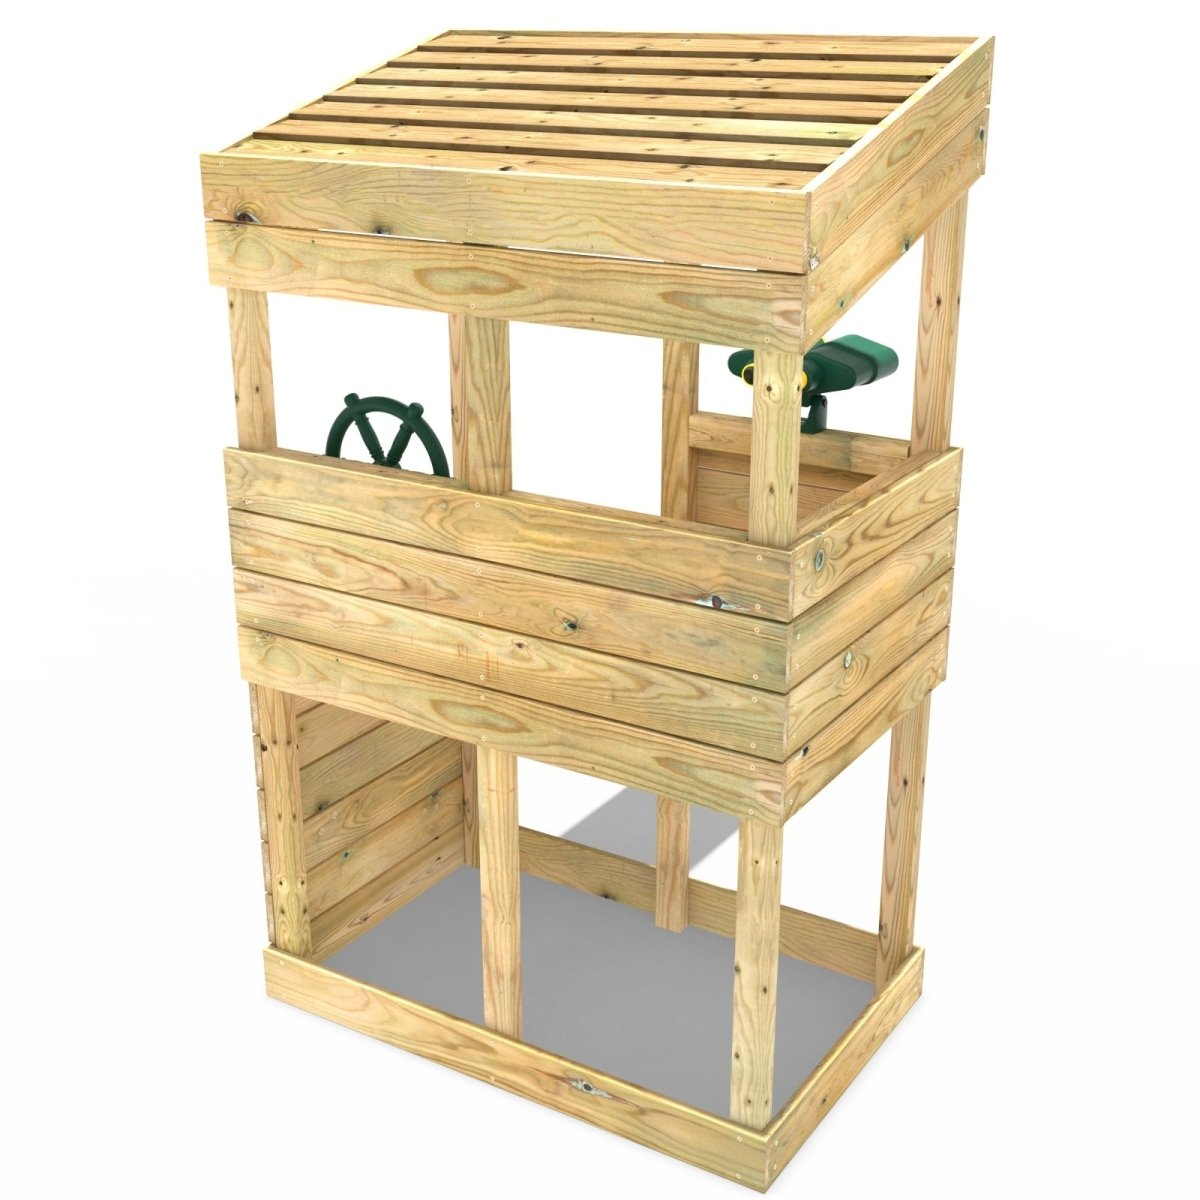 Rebo Wooden Lookout Tower Playhouse with 6ft Slide - Lookout with Adventure Pack